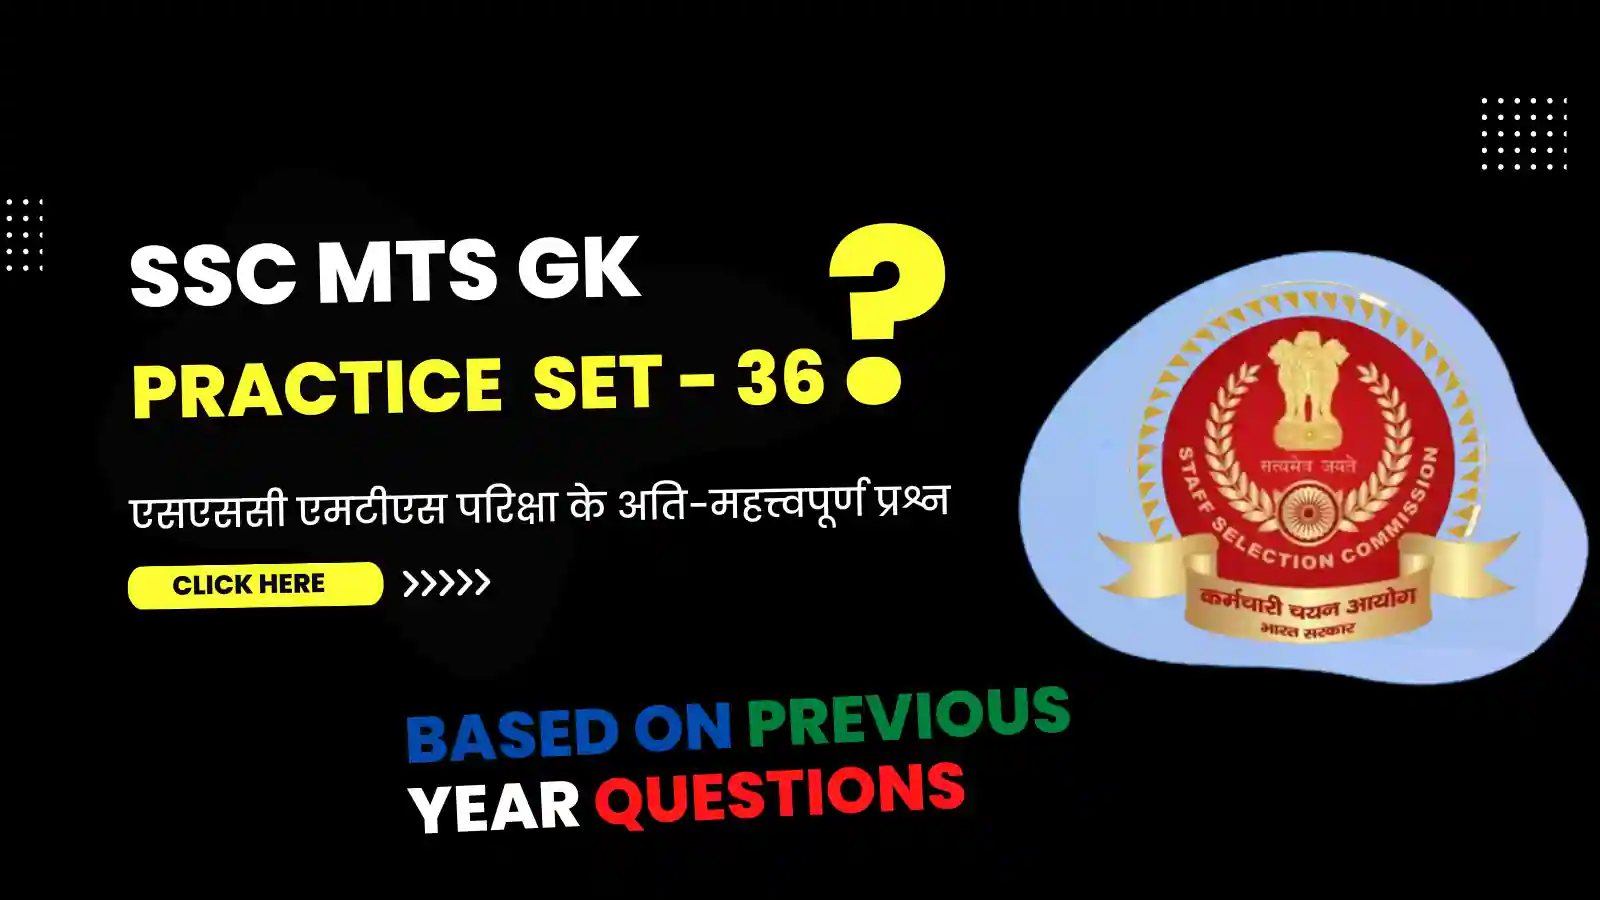 SSC MTS GK Question Practice Set in Hindi - 36